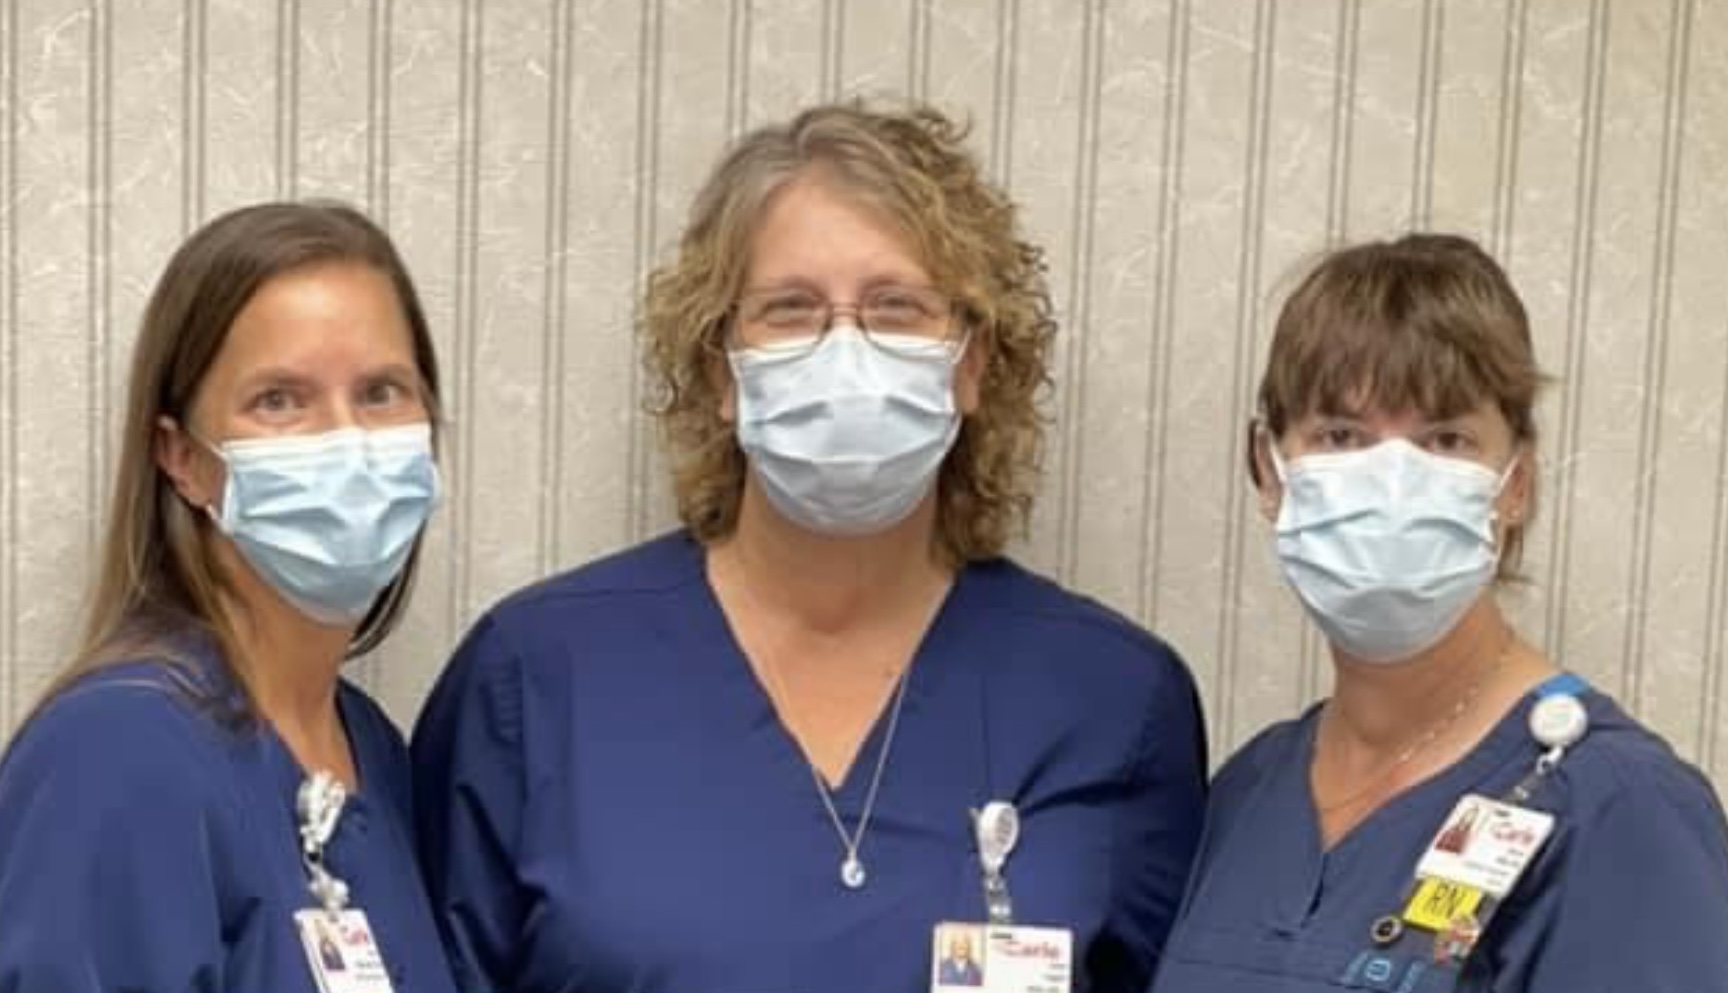 Sisters follow in each other's footsteps to become legacy nurses